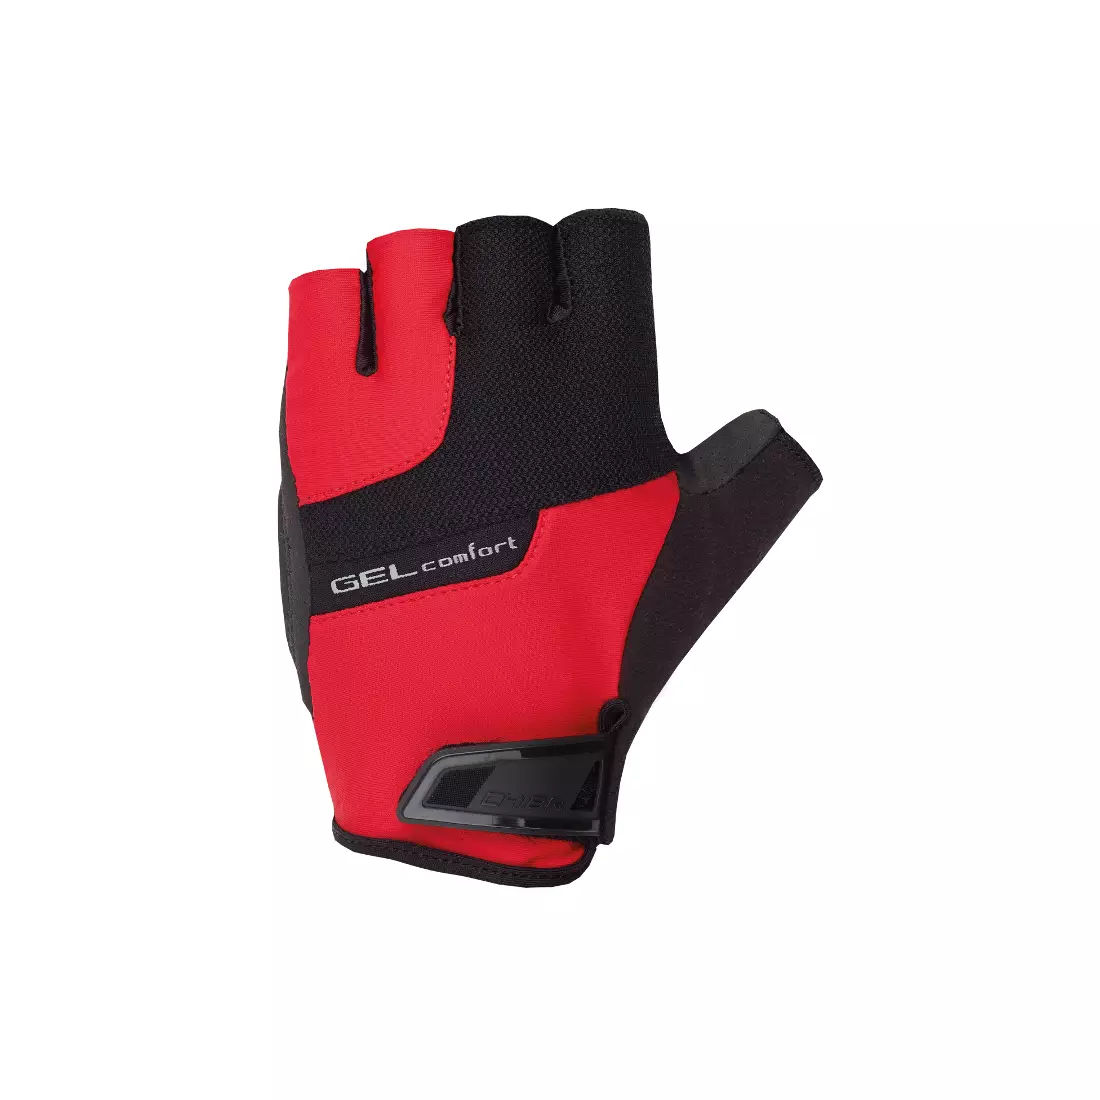 CHIBA GEL COMFORT cycling gloves, red, 3040518